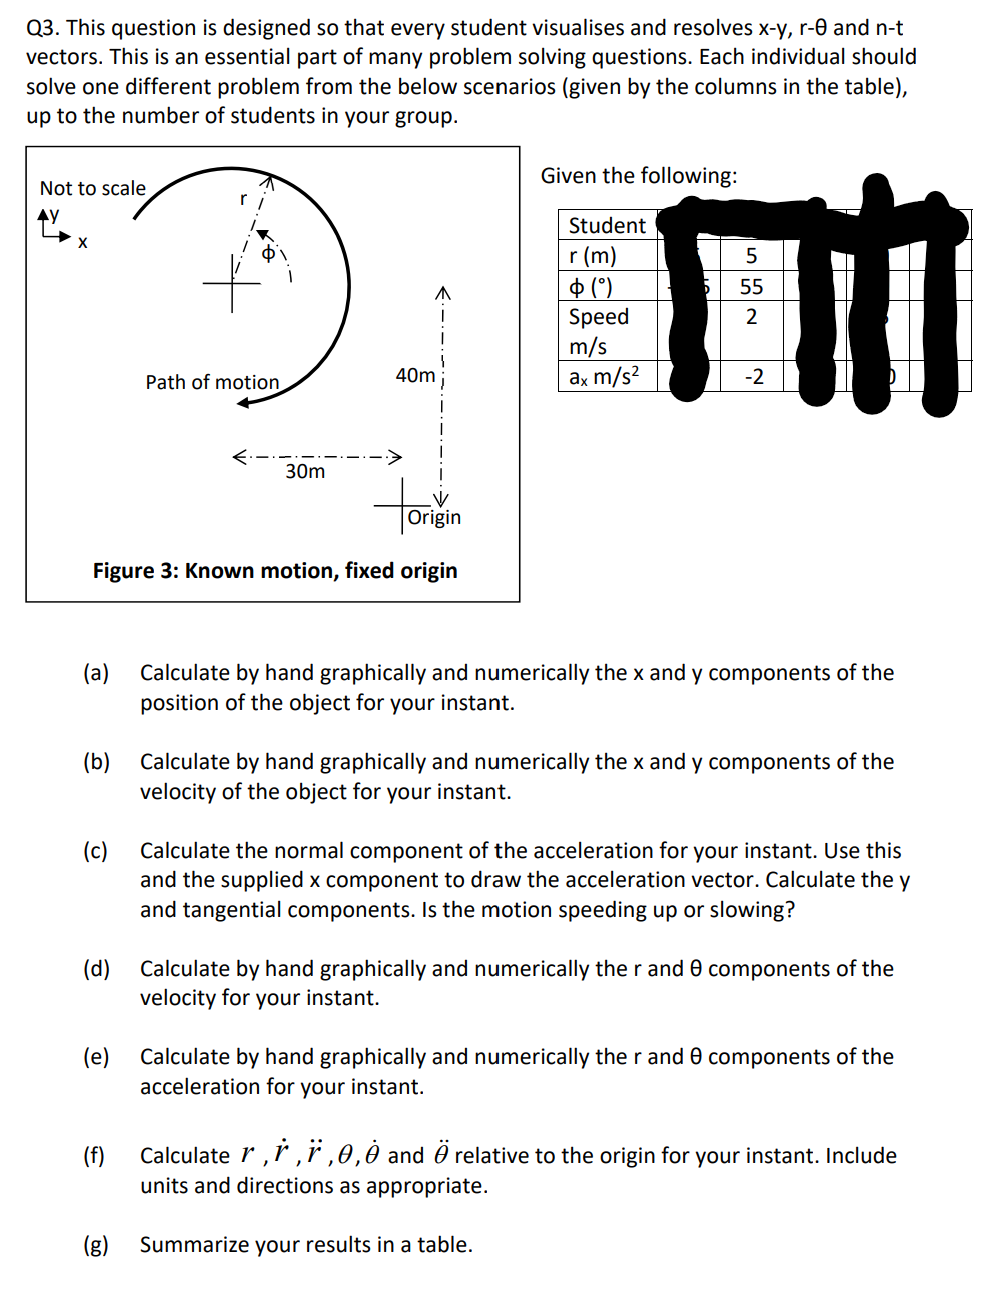 Q3. This question is designed so that every student visualises and resolves x-y, r-0 and n-t
vectors. This is an essential part of many problem solving questions. Each individual should
solve one different problem from the below scenarios (given by the columns in the table),
up to the number of students in your group.
Given the following:
Not to scale
AY
Student
r (m)
$ (*)
Speed
m/s
ax m/s?
5
55
2
Path of motion
40m
-2
30m
Origin
Figure 3: Known motion, fixed origin
(a)
Calculate by hand graphically and numerically the x and y components of the
position of the object for your instant.
(b)
Calculate by hand graphically and numerically the x and y components of the
velocity of the object for your instant.
(c)
Calculate the normal component of the acceleration for your instant. Use this
and the supplied x component to draw the acceleration vector. Calculate the y
and tangential components. Is the motion speeding up or slowing?
(d) Calculate by hand graphically and numerically the r and 0 components of the
velocity for your instant.
(e)
Calculate by hand graphically and numerically the r and 0 components of the
acceleration for your instant.
(f)
Calculate r,r ,r ,0,0 and 0 relative to the origin for your instant. Include
units and directions as appropriate.
(g)
Summarize your results in a table.
